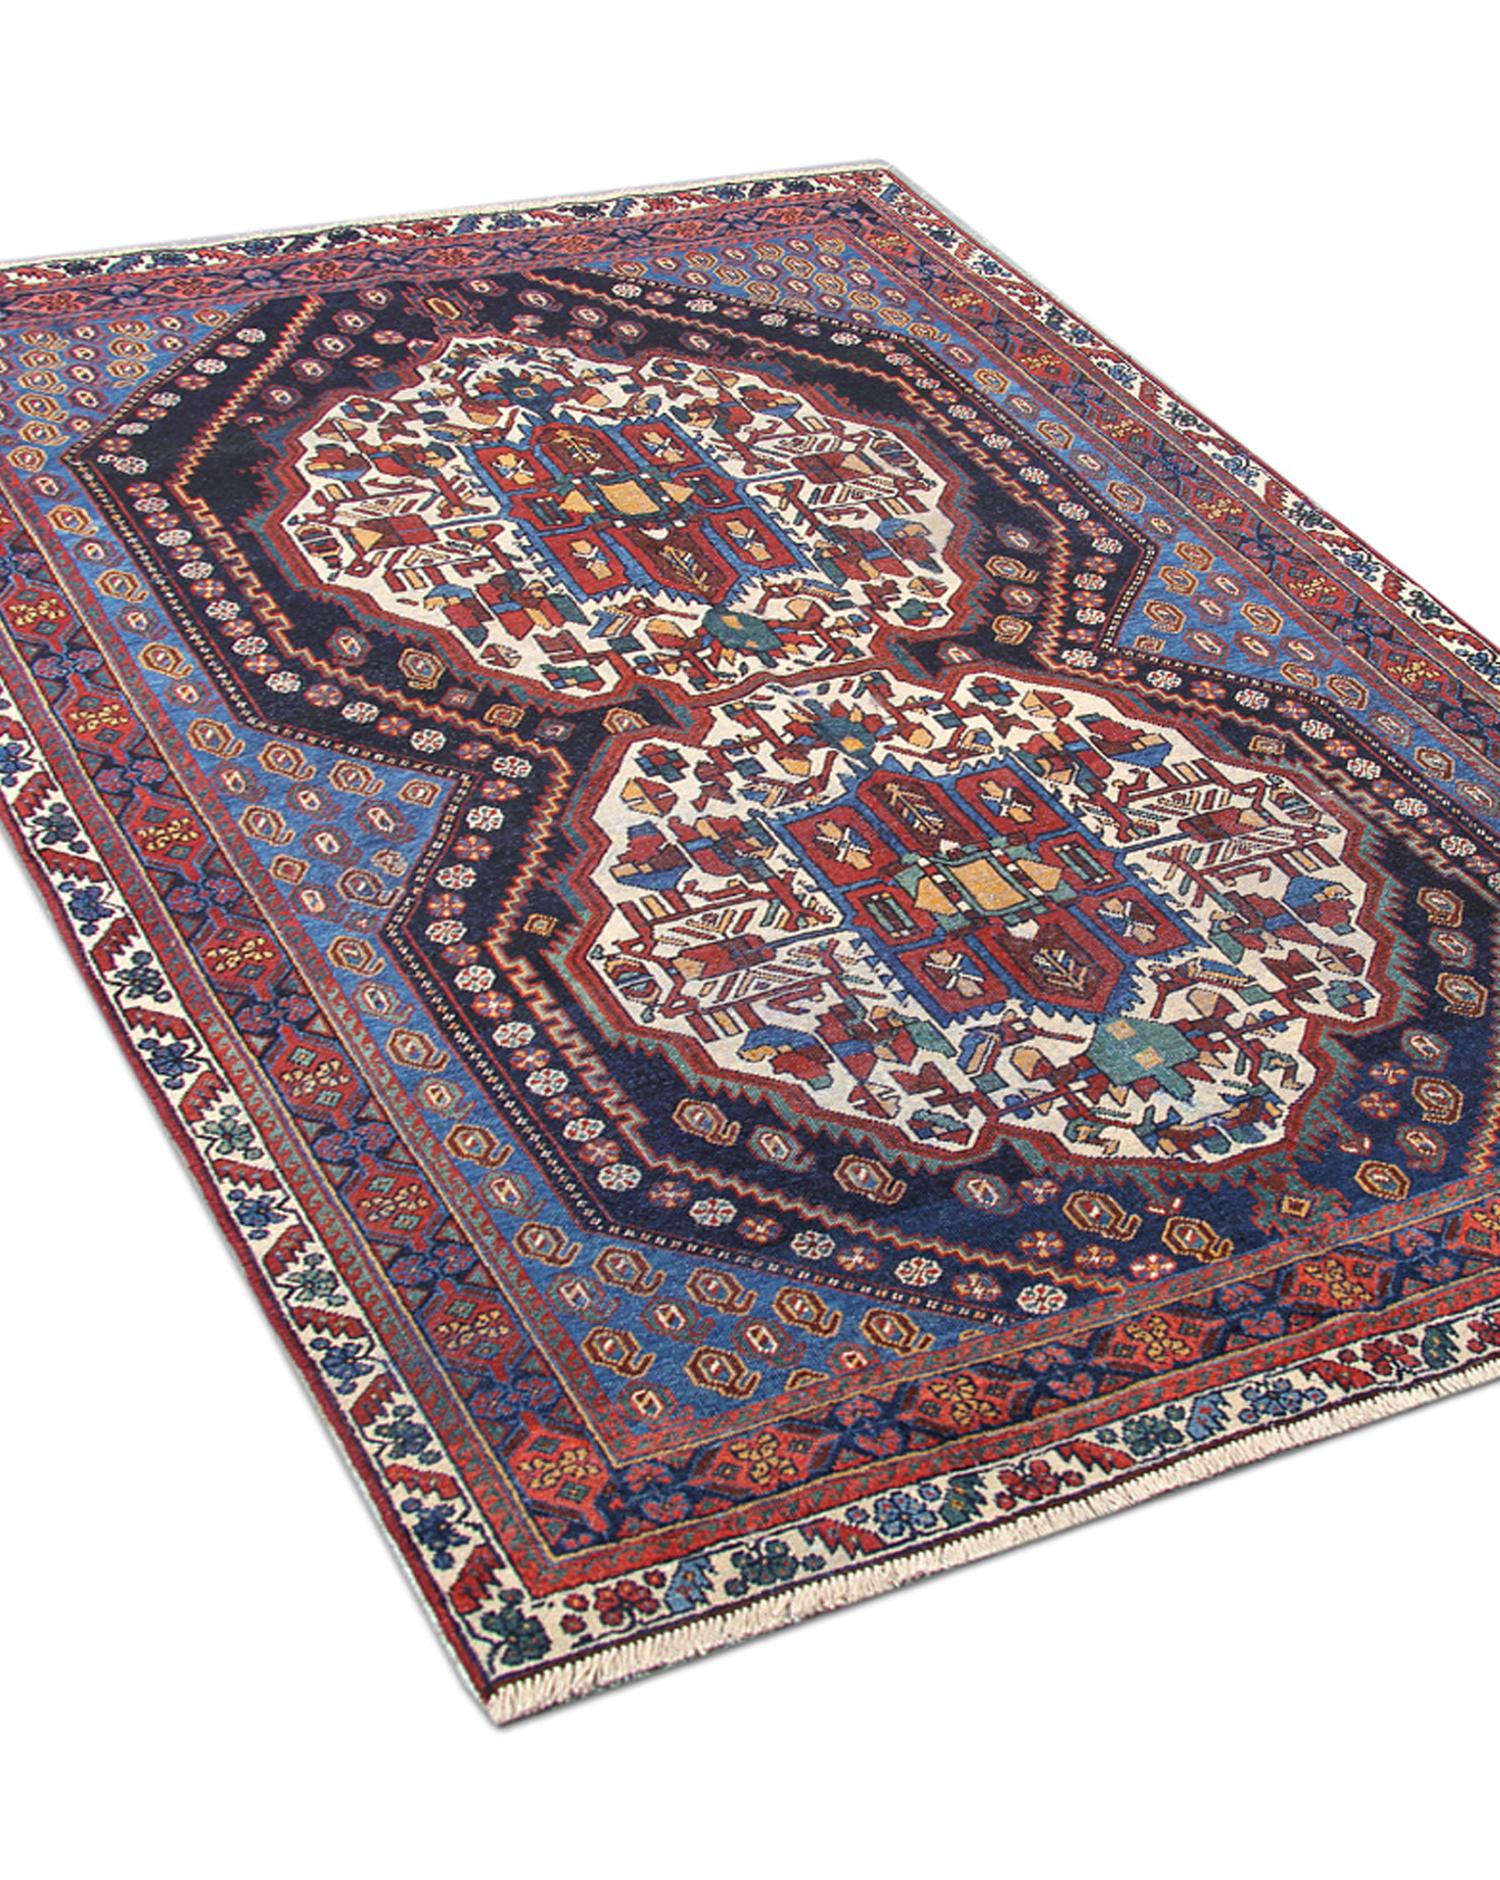 This traditional carpet handwoven area rug was constructed in the 1940s. It features two highly detailed central medallions woven on a deep blue field in accents of ivory blue and red. Handwoven with hand-spun wool, which was organically dyed using